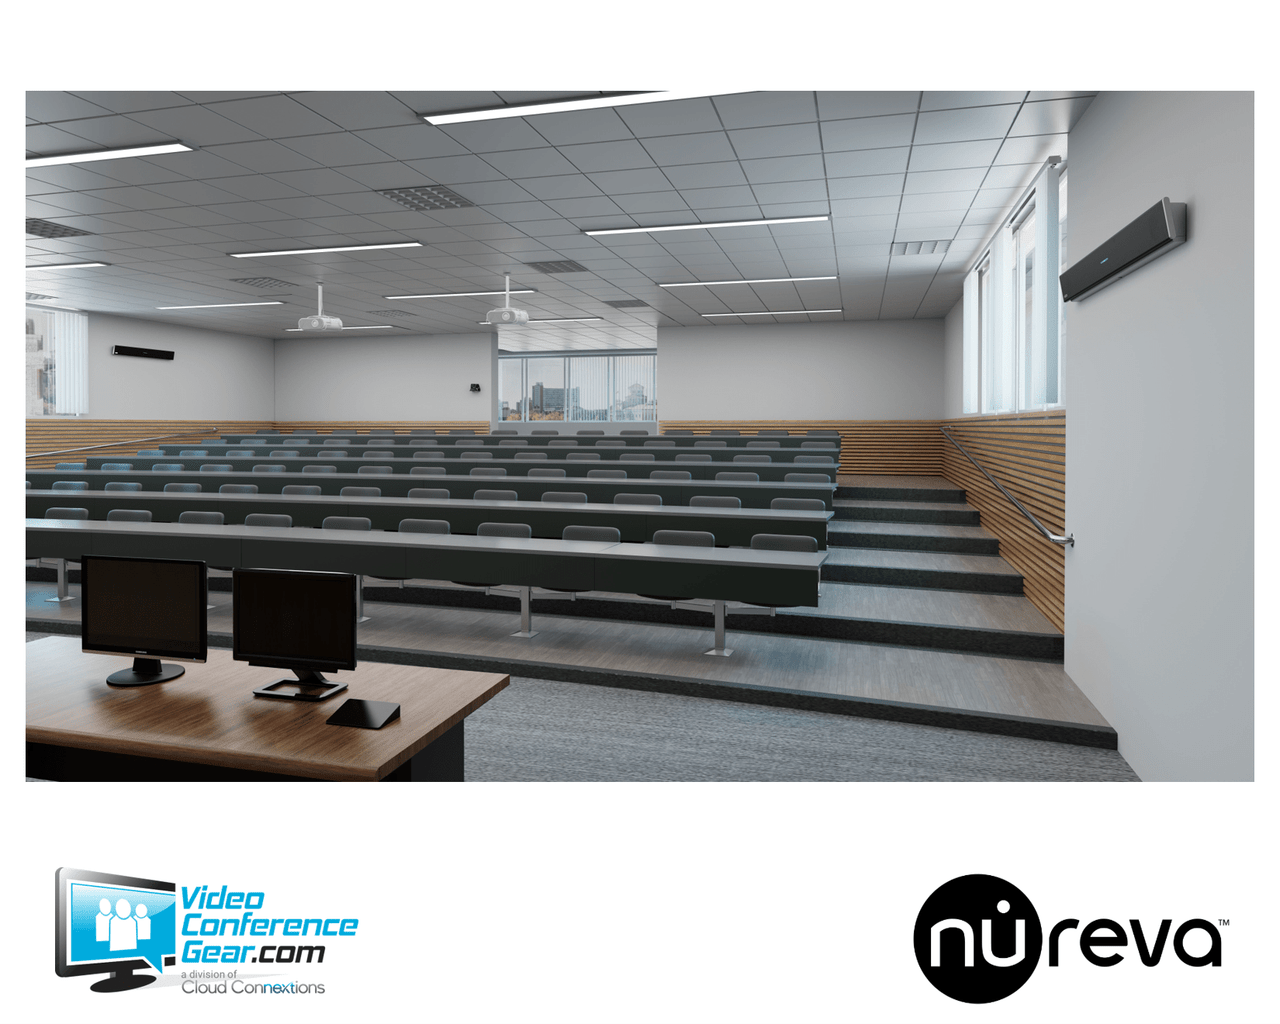 Nureva HDL410 Audio Solution for Large Meeting Spaces and Classrooms up to 35' x 55' (Black)